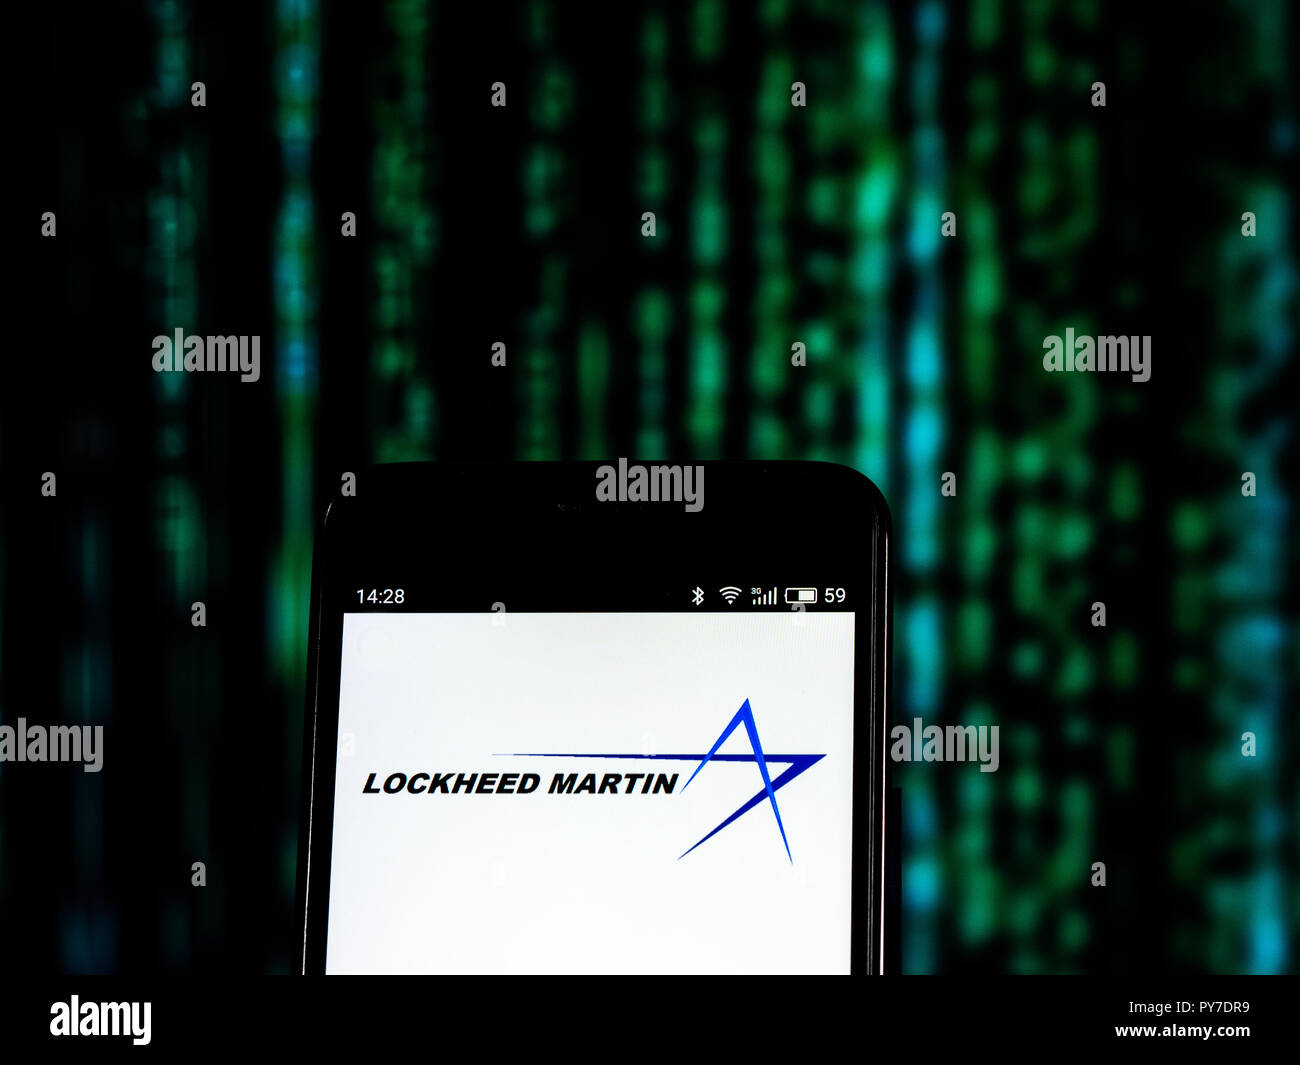 Lockheed Martin Aerospace and defense company logo seen displayed on smart phone. Lockheed Martin Corporation is an American global aerospace, defense, security and advanced technologies company with worldwide interests. Stock Photo